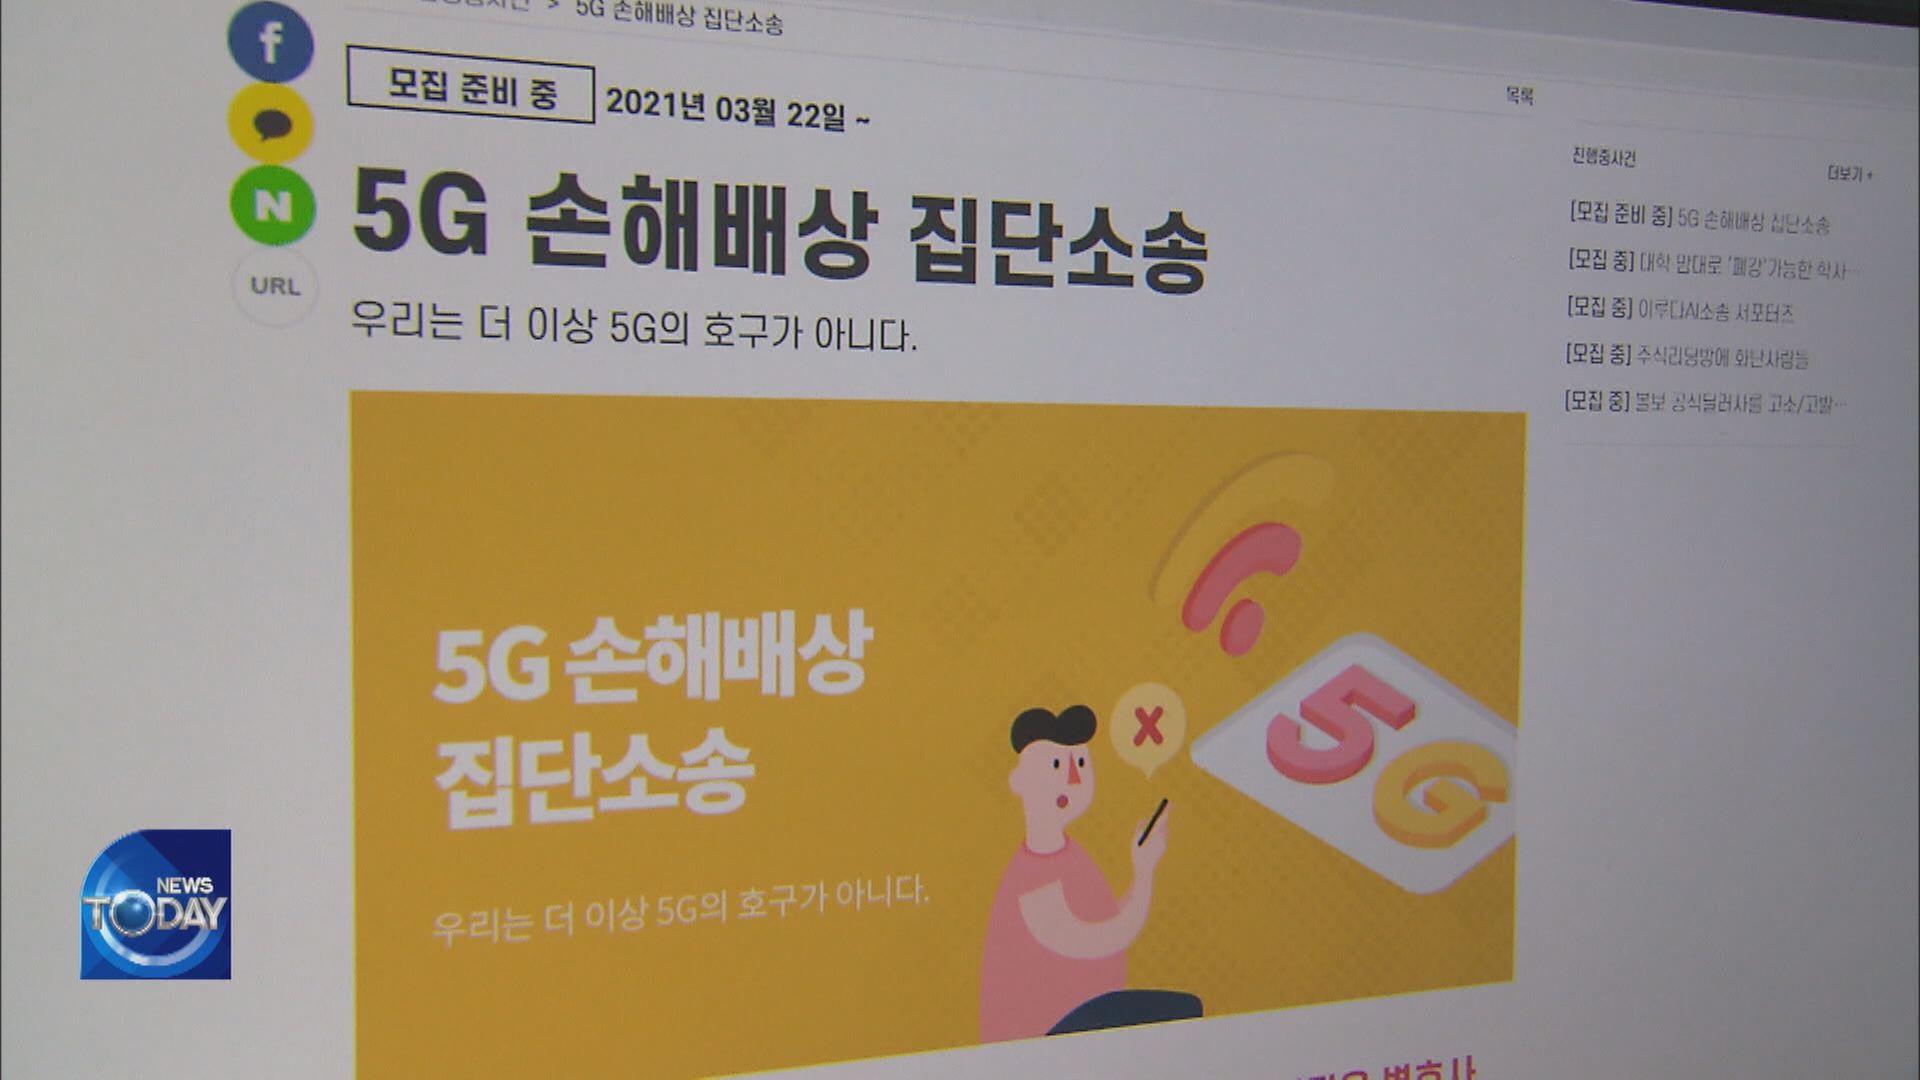 FALSE ADVERTISING ON 5G SERVICES